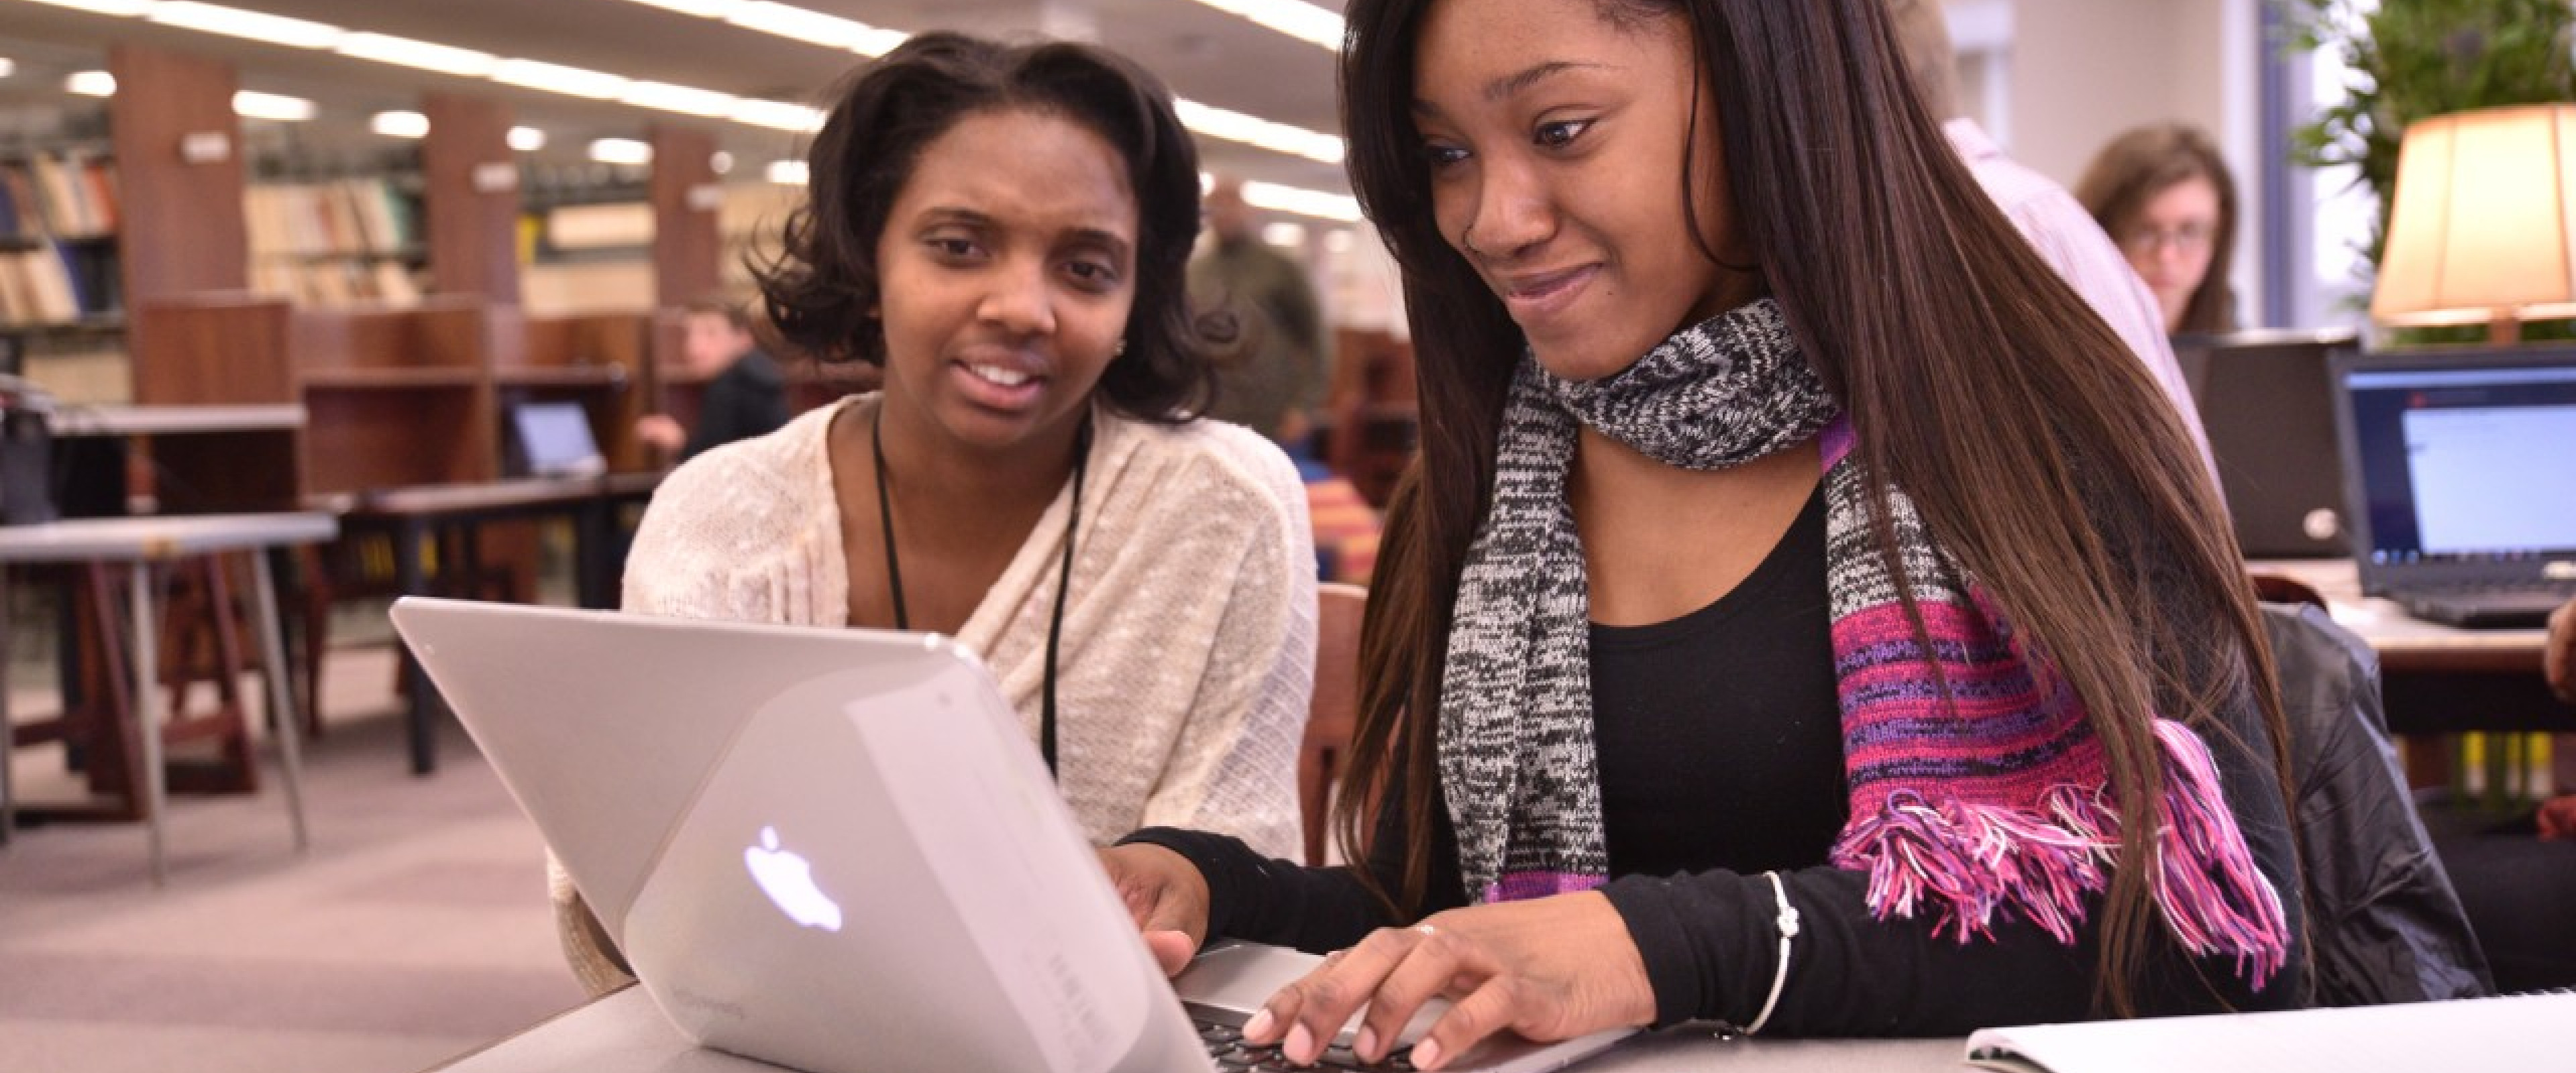 Two students work together on a laptop in Waldo Library